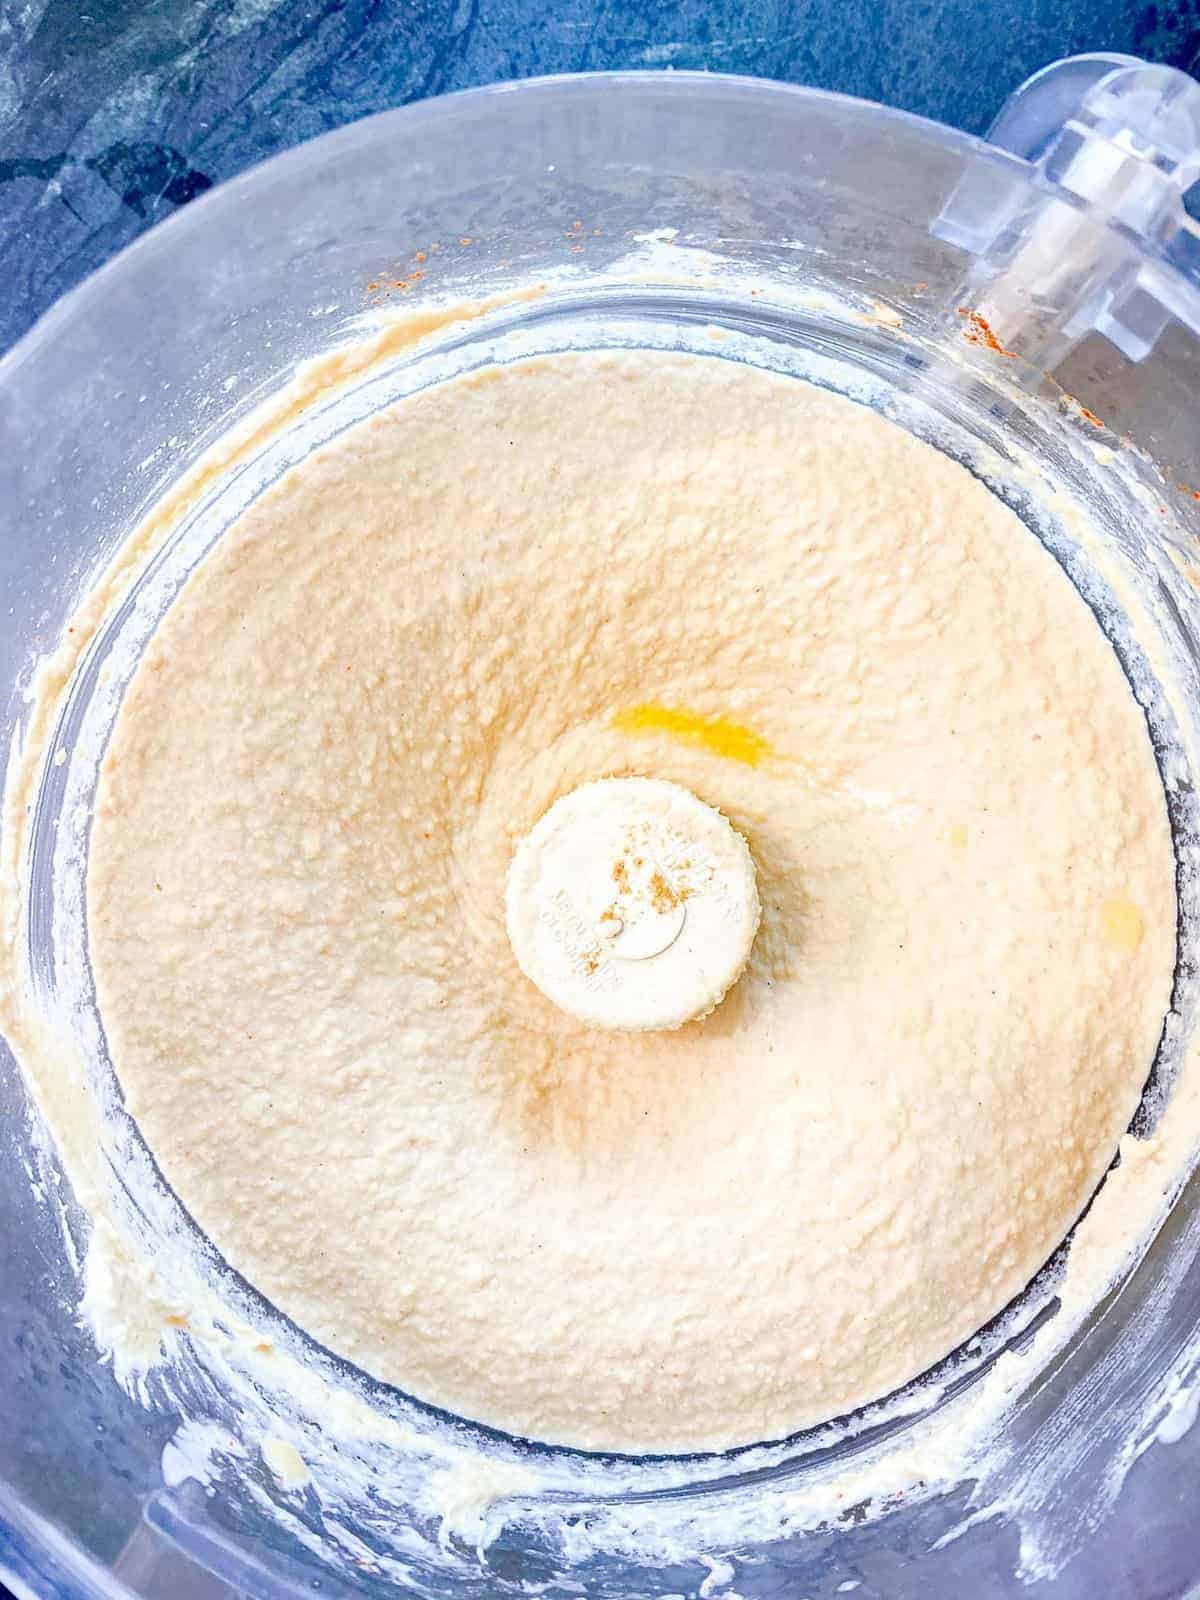 blend the hummus until smooth